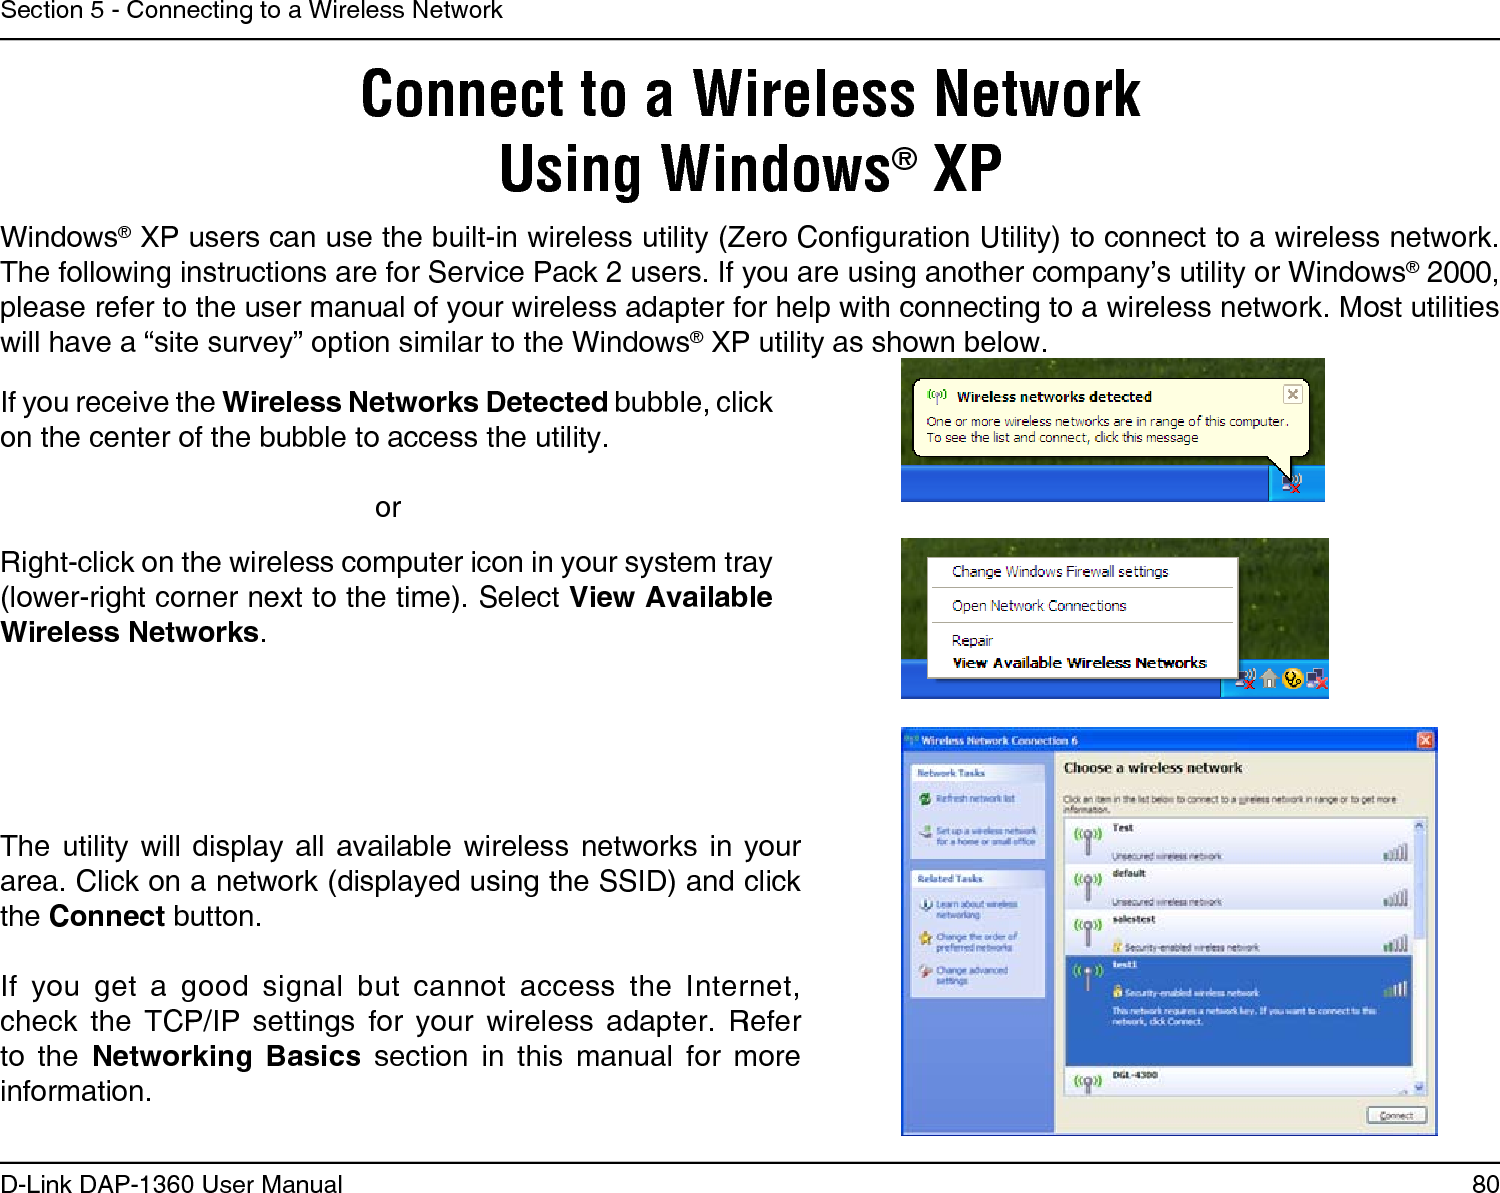 80D-Link DAP-1360 User ManualSection 5 - Connecting to a Wireless NetworkConnect to a Wireless NetworkUsing Windows® XPWindows® XP users can use the built-in wireless utility (Zero Conguration Utility) to connect to a wireless network. The following instructions are for Service Pack 2 users. If you are using another company’s utility or Windows® 2000, please refer to the user manual of your wireless adapter for help with connecting to a wireless network. Most utilities will have a “site survey” option similar to the Windows® XP utility as shown below.Right-click on the wireless computer icon in your system tray (lower-right corner next to the time). Select View Available Wireless Networks.If you receive the Wireless Networks Detected bubble, click on the center of the bubble to access the utility.     orThe  utility  will display  all  available  wireless  networks  in  your area. Click on a network (displayed using the SSID) and click the Connect button.If  you  get  a  good  signal  but  cannot  access  the  Internet, check  the  TCP/IP  settings  for  your  wireless  adapter.  Refer to  the  Networking  Basics  section  in  this  manual  for  more information.